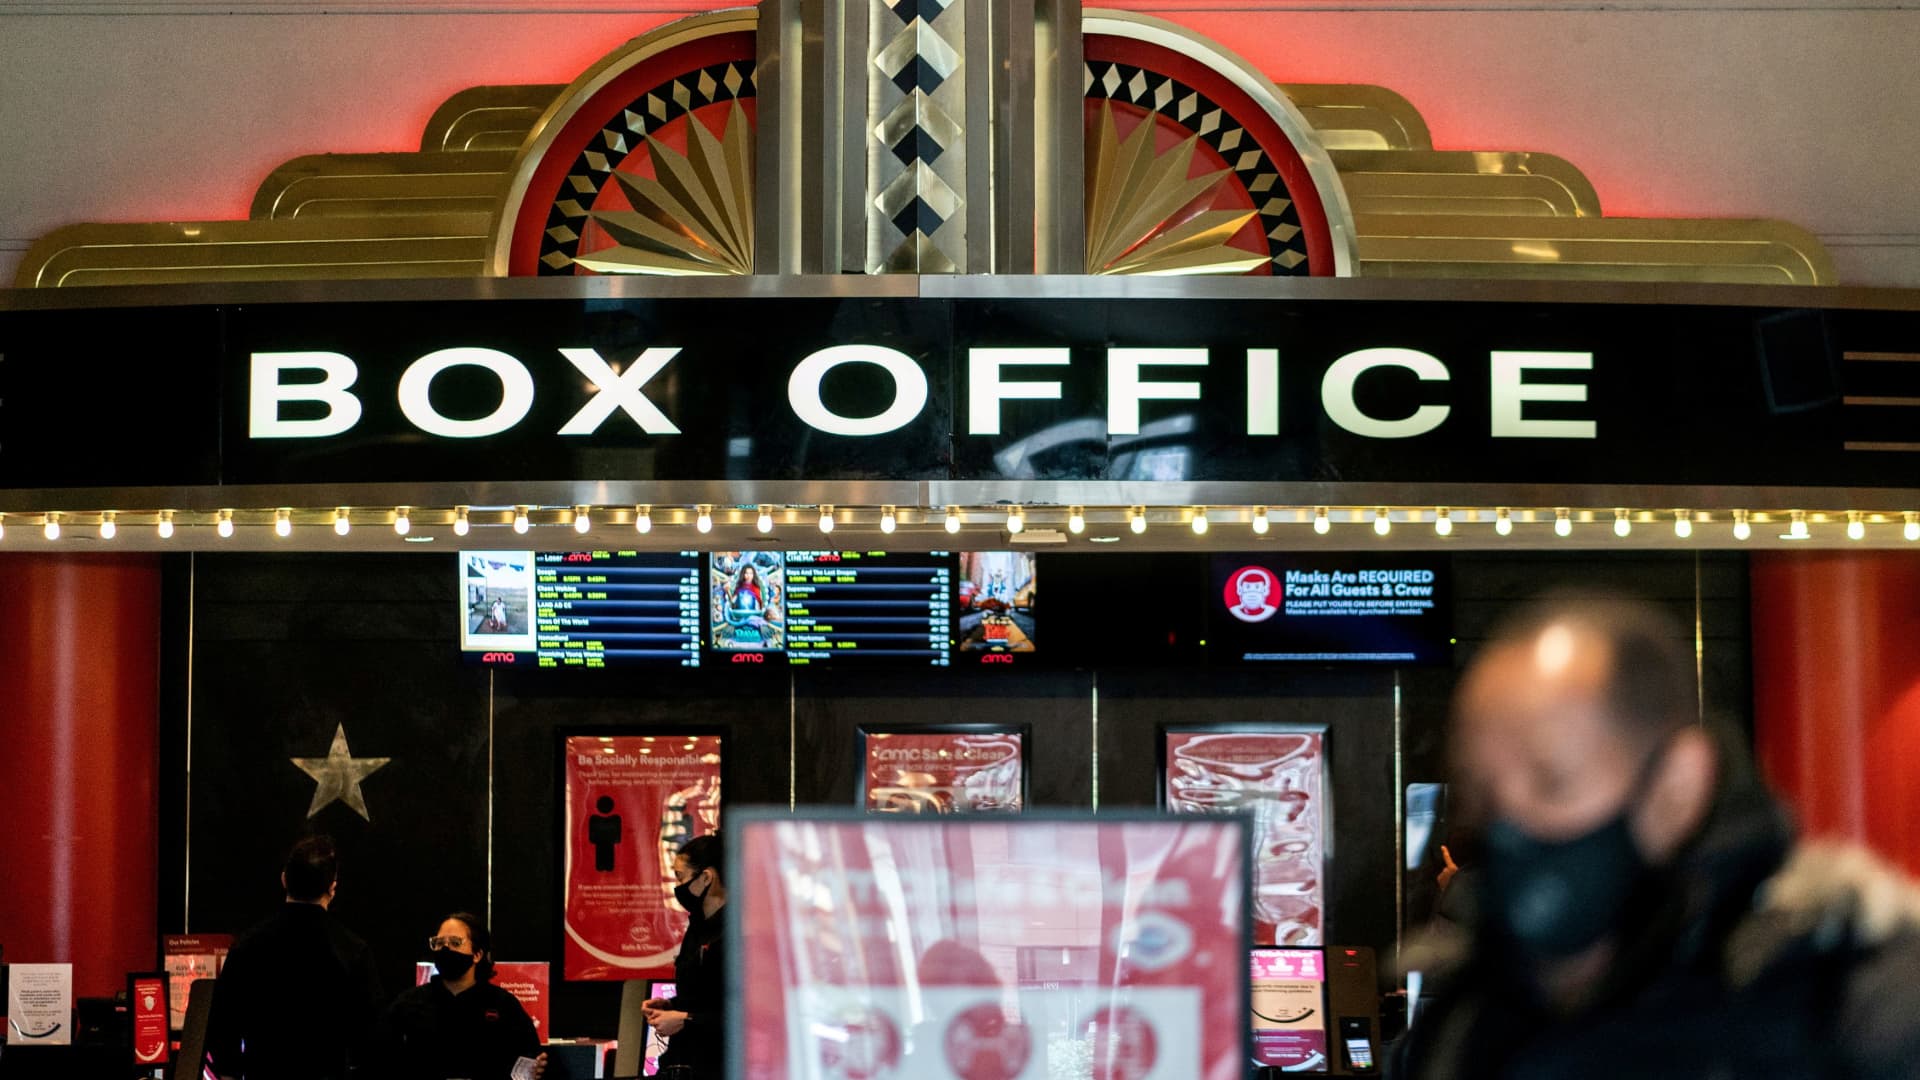 Movie theater stocks pop after report says Amazon plans to spend $1 billion on releases - CNBC